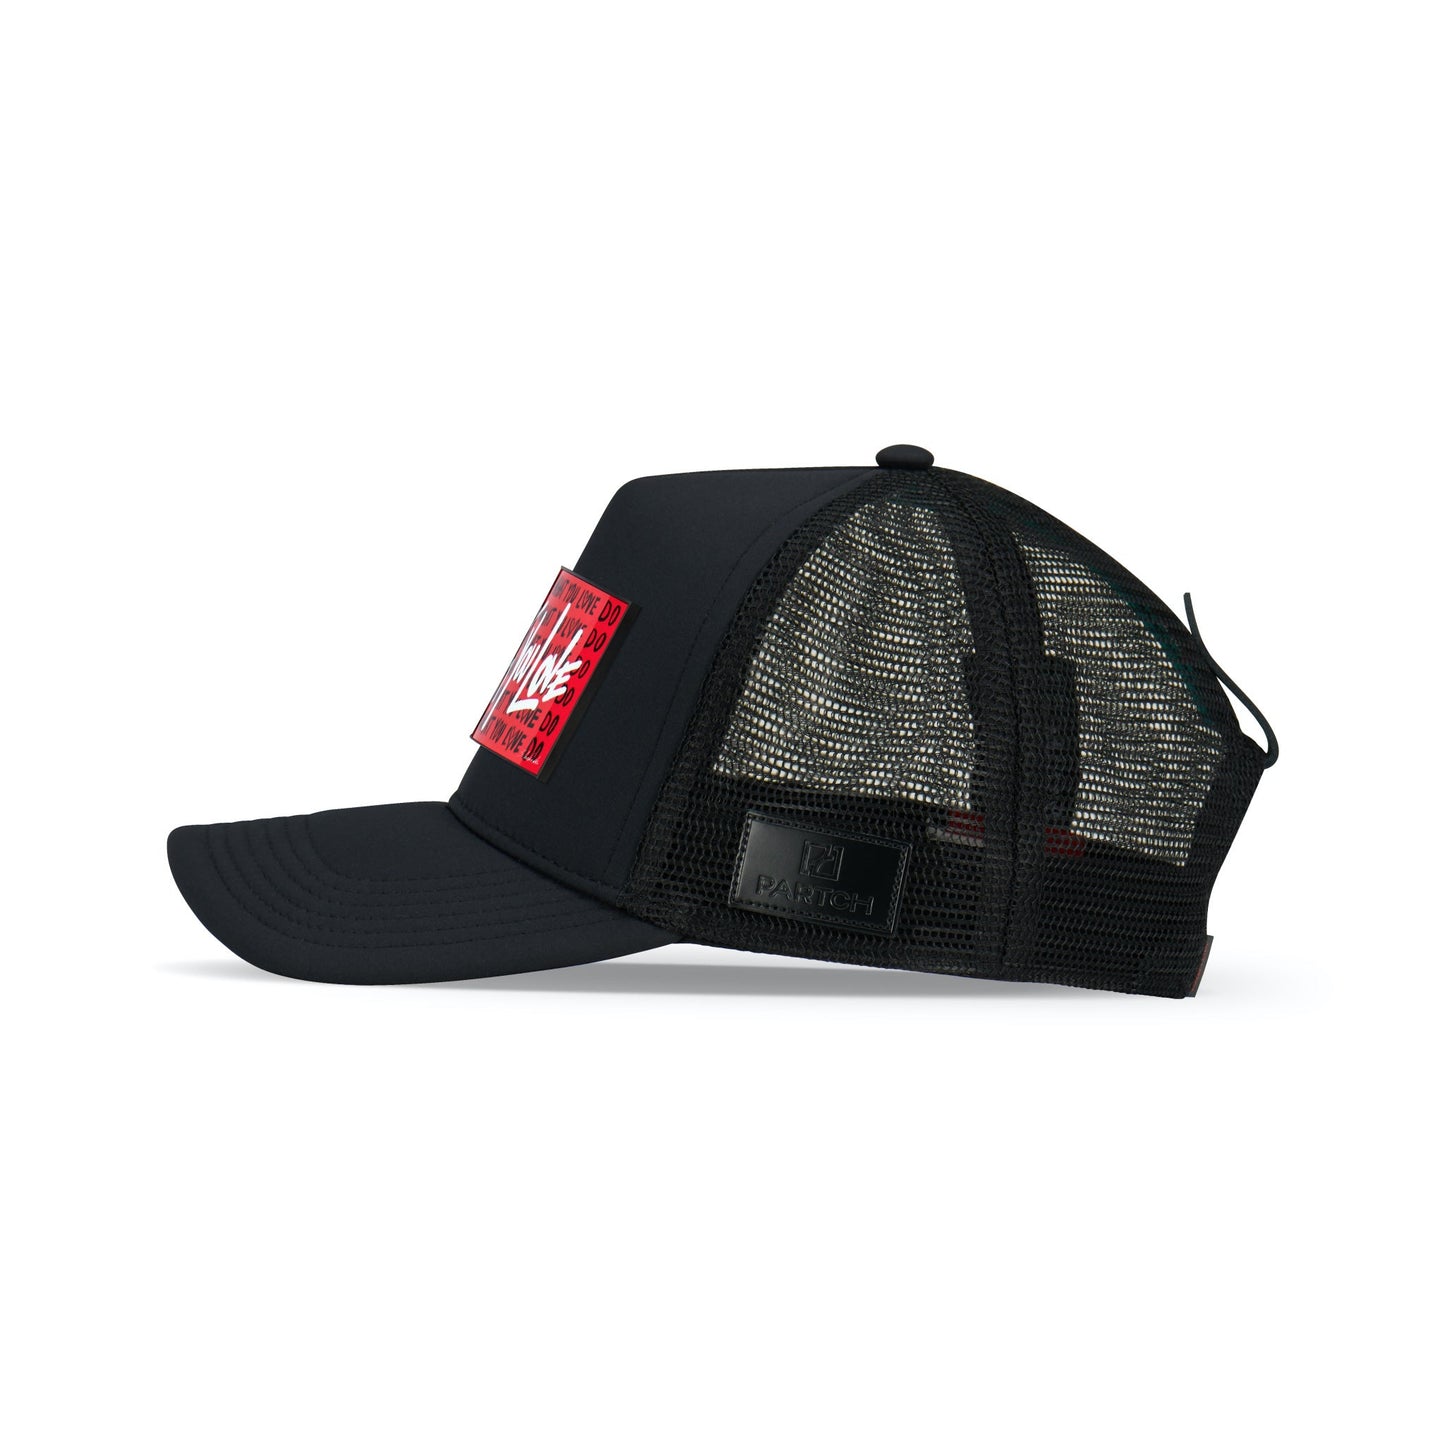 Partch Trucker Hat Black with PARTCH-Clip DWYL-R55 Side View